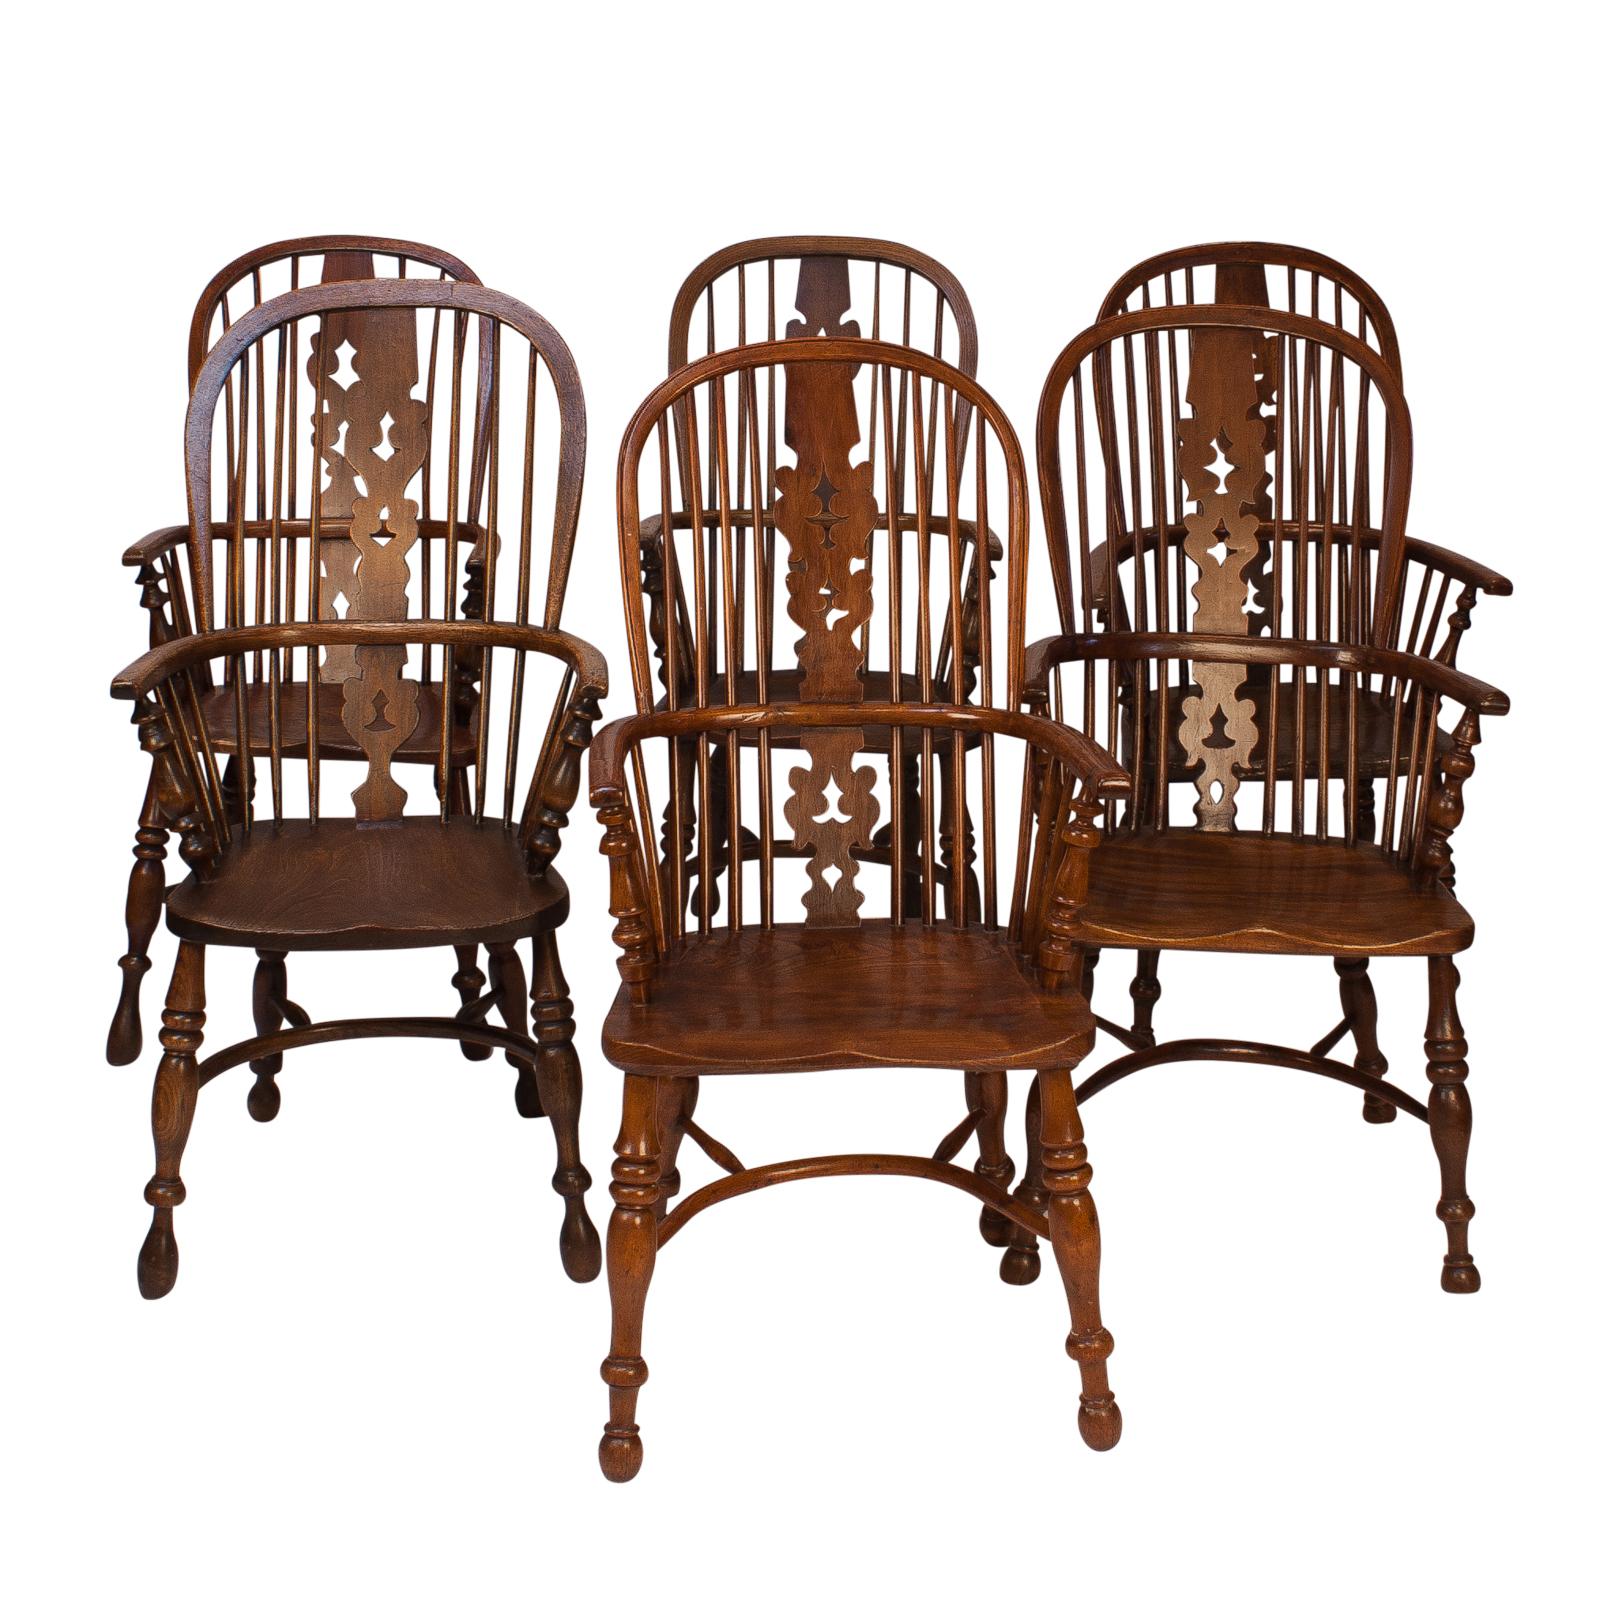 Assembled Set of 6 Windsor Armchairs, England, 19th Century